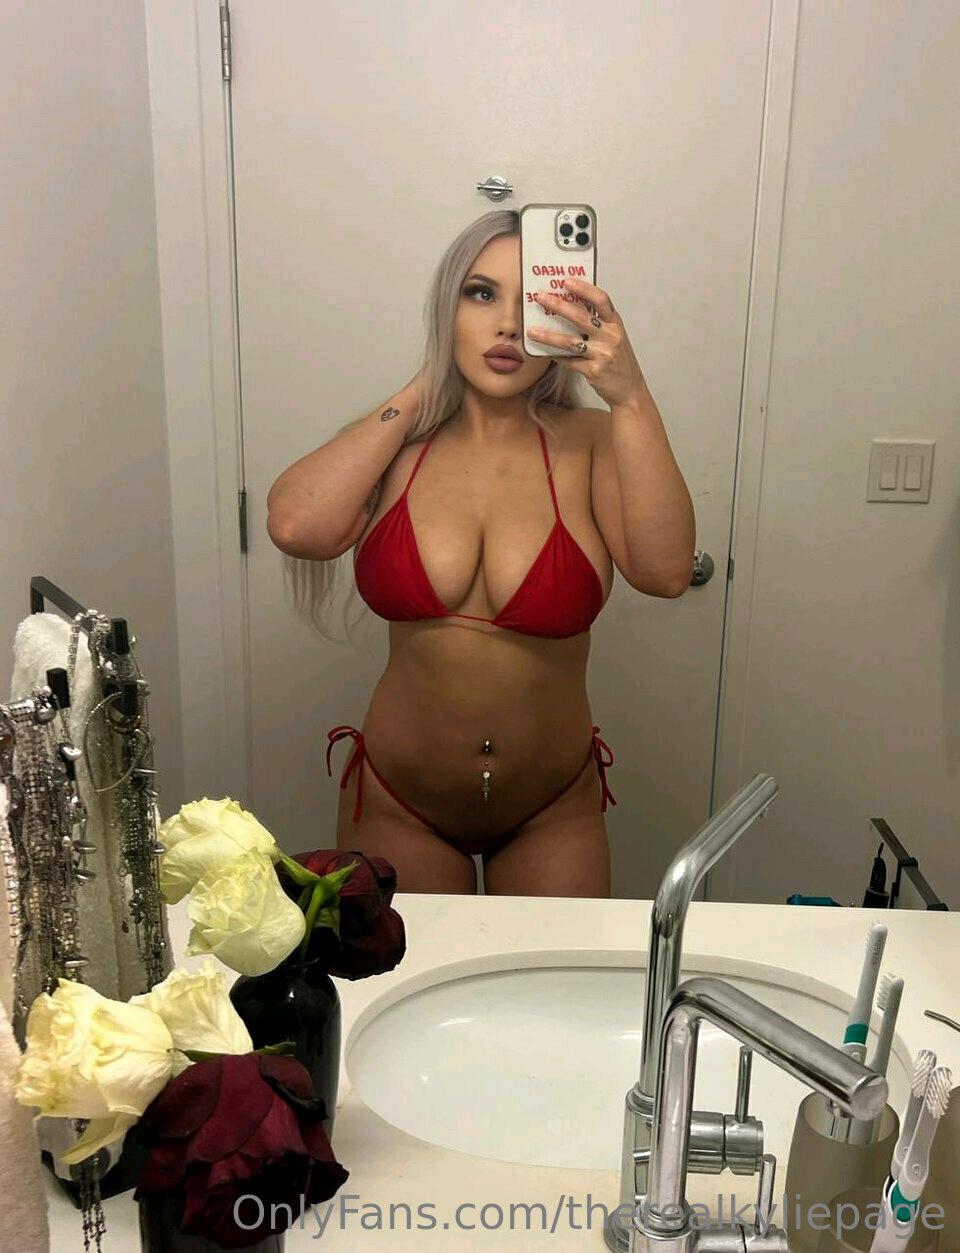 Lilmiskp Therealkyliepage Onlyfans Kylie Page Nude Leaks 011